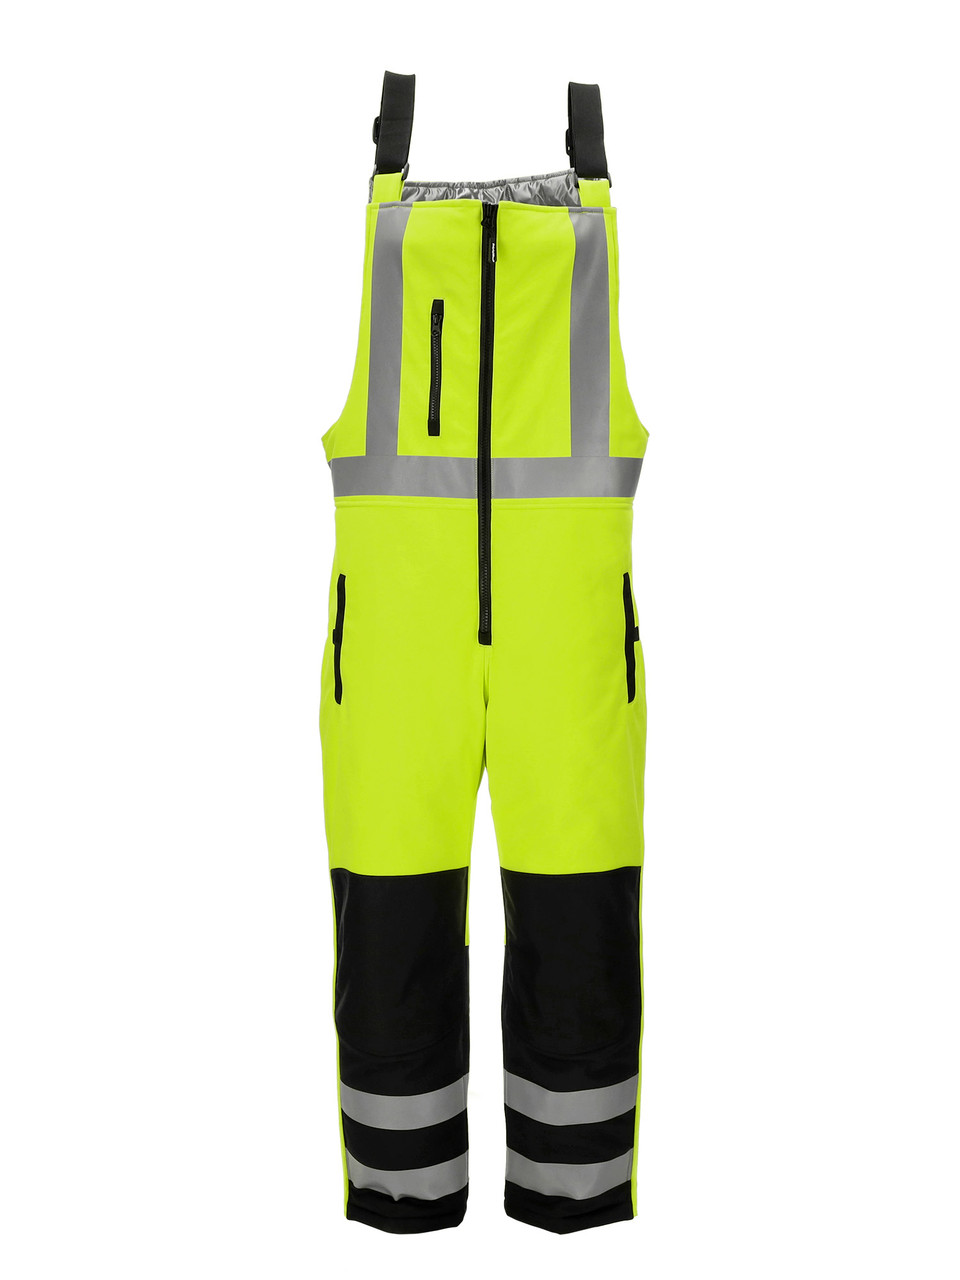 RefrigiWear HiVis Insulated Softshell High Bib Overalls | Lime/Black | Fit: Big & Tall | 100% Polyester | XL